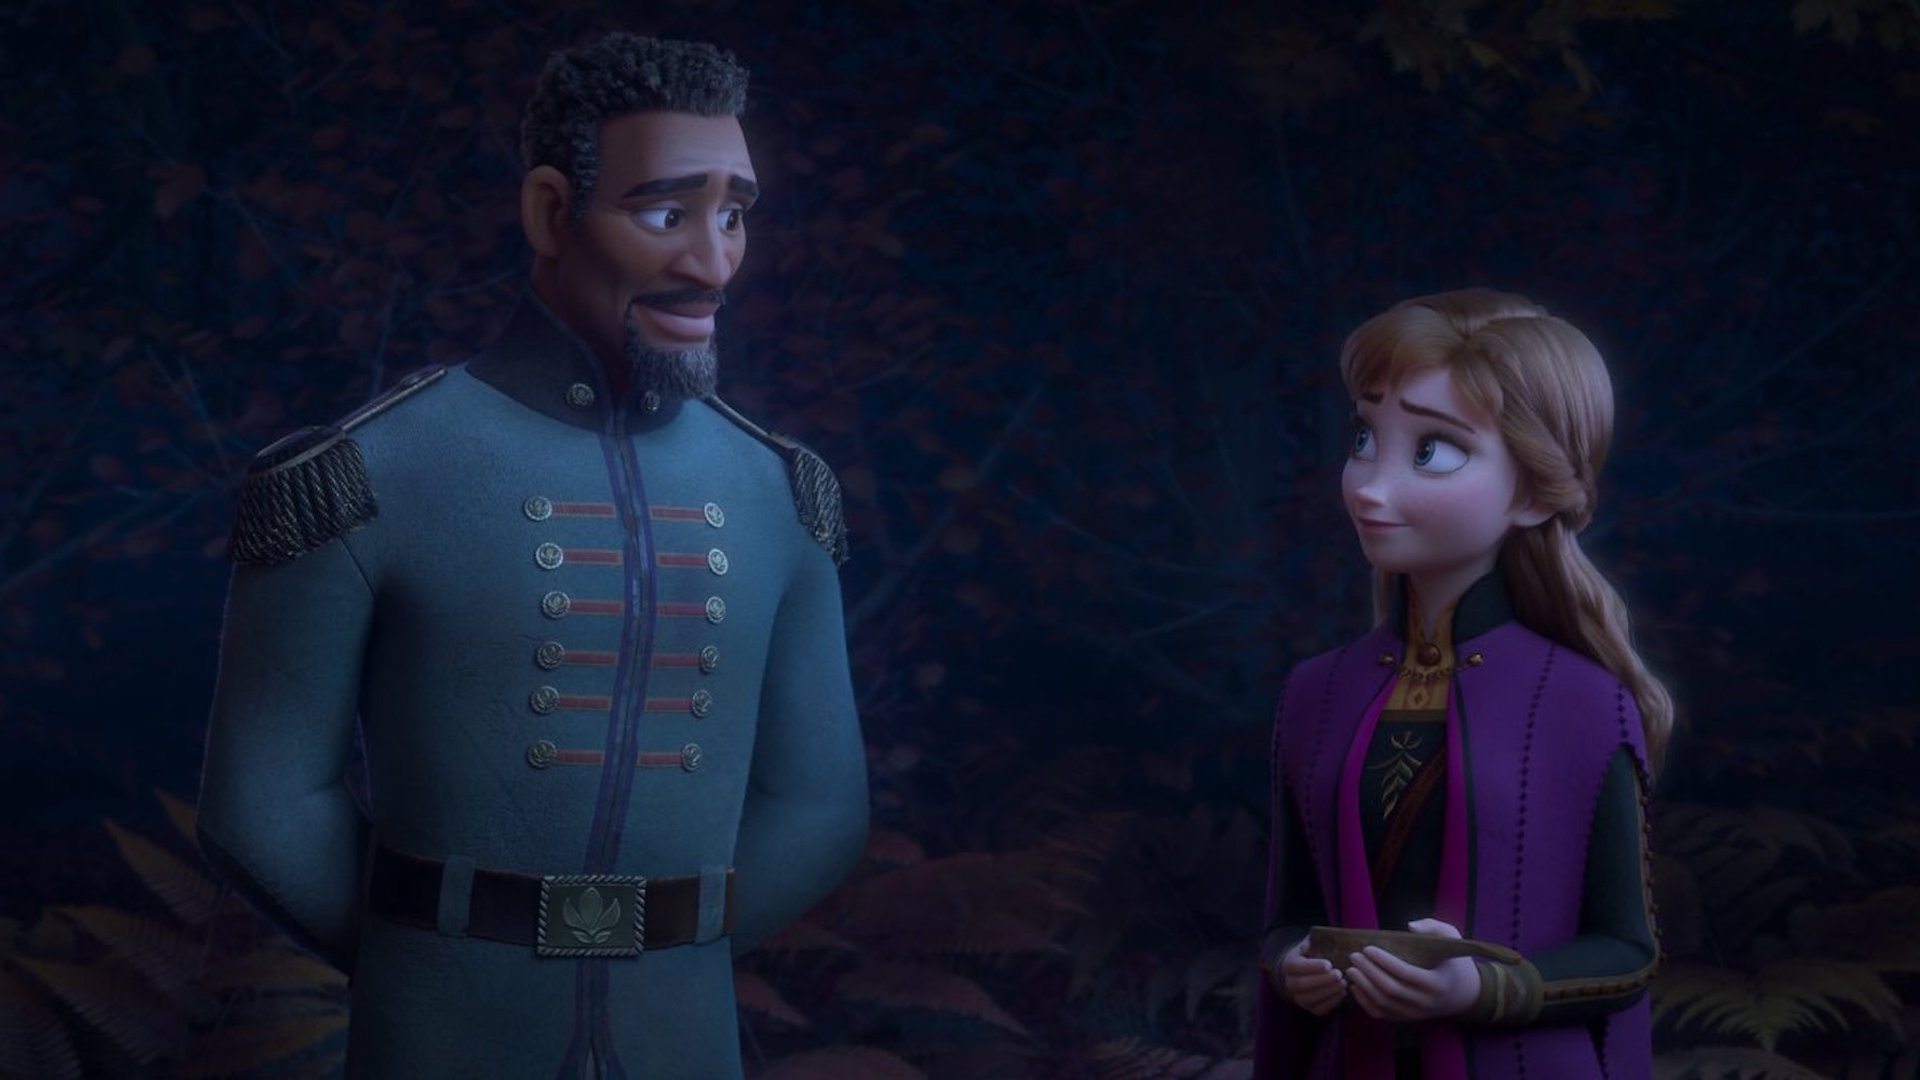 Anna meets a soldier in the Enchanted Forest